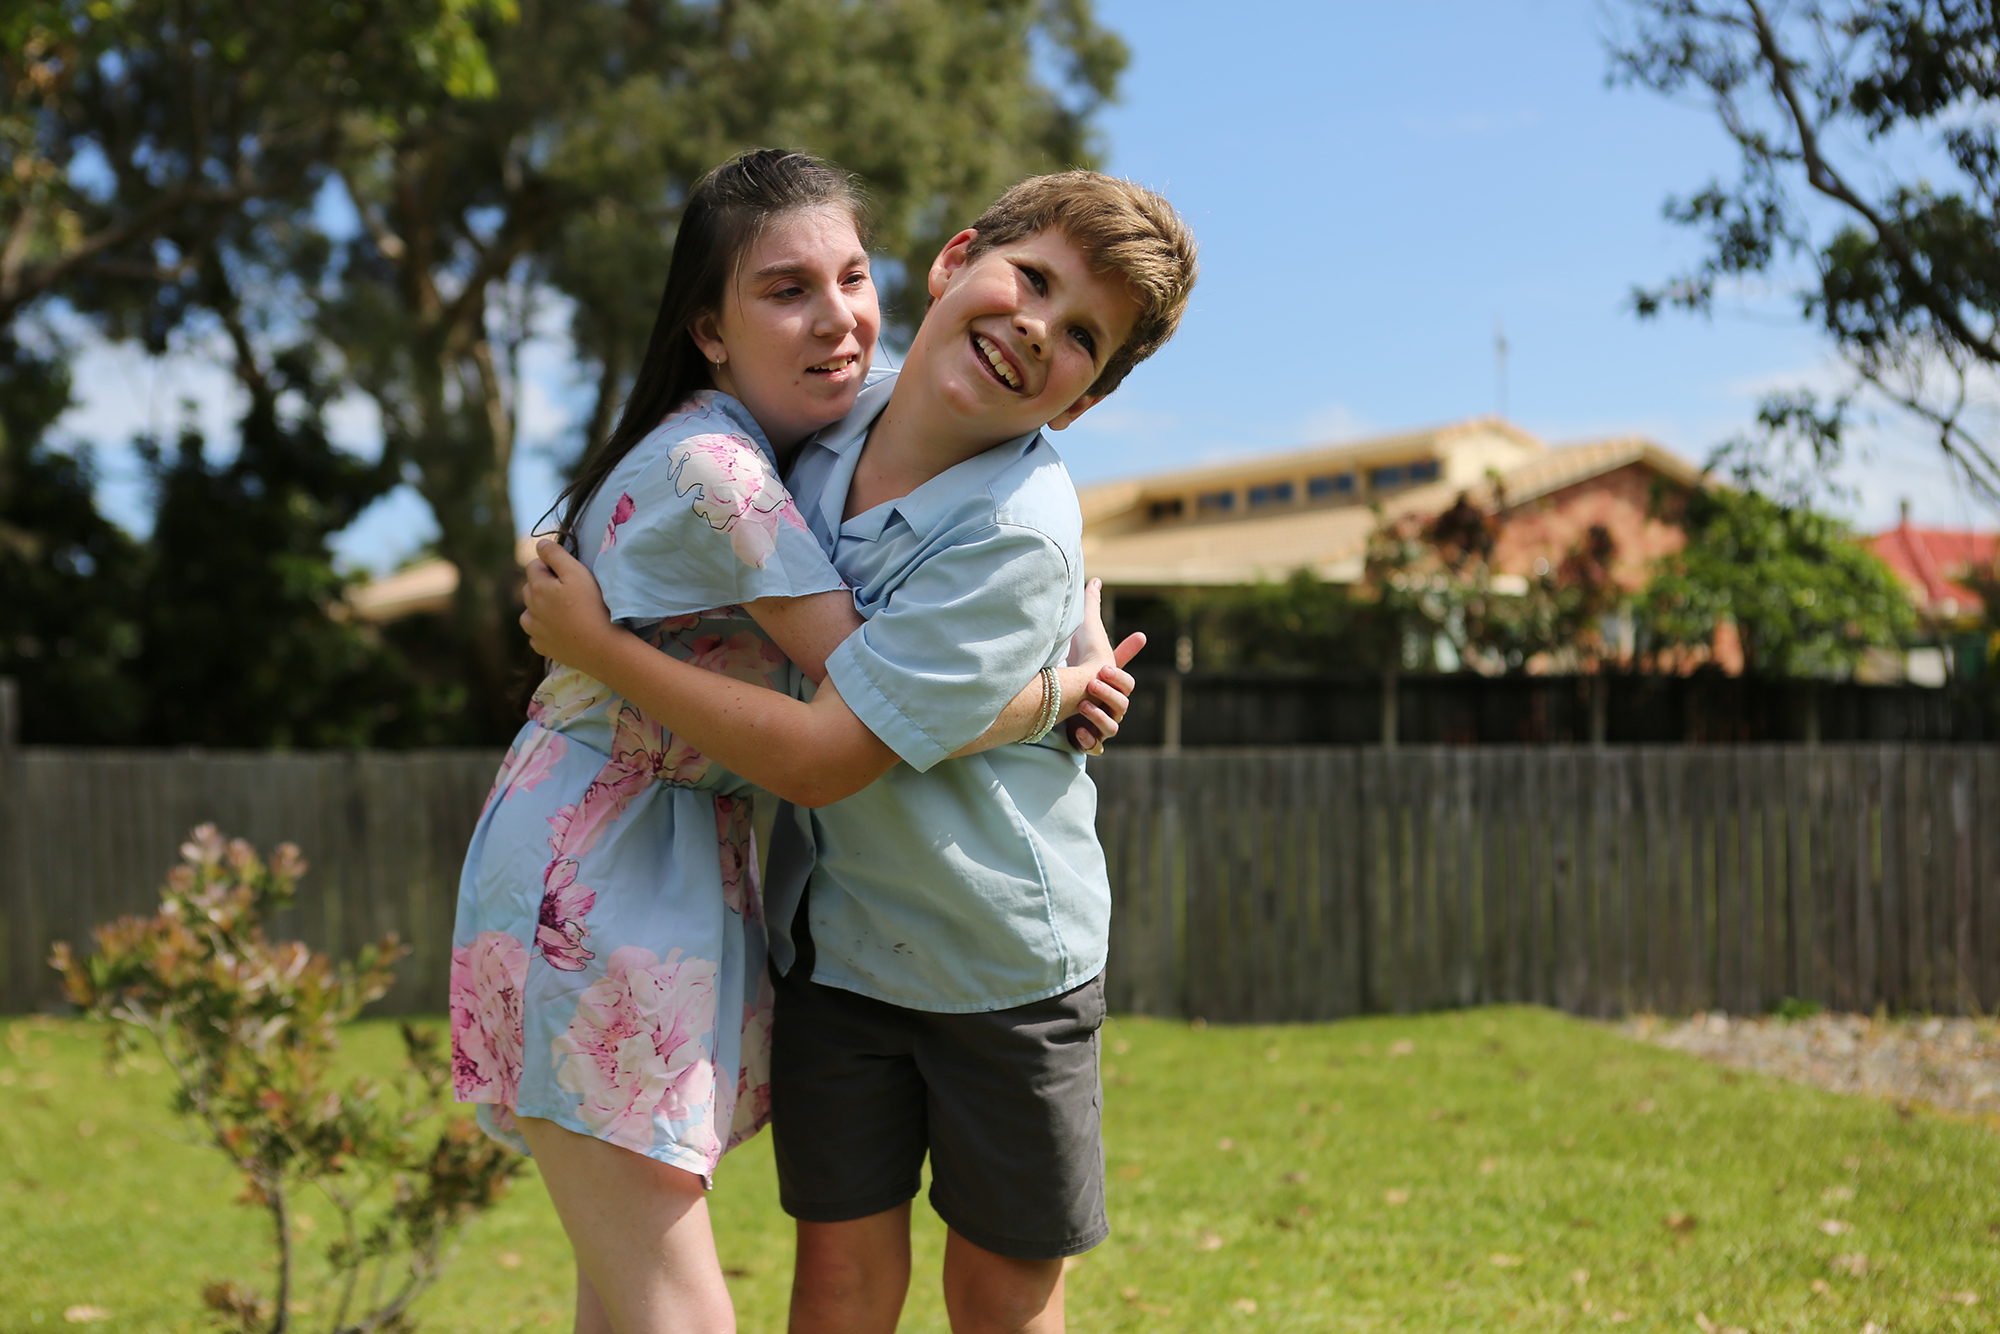  Tanisha has a rare genetic disorder which has resulted in intellectual and physical disabilities. Her younger brother Harley helps his mother take care of her.  Featured in The Guardian Australia  